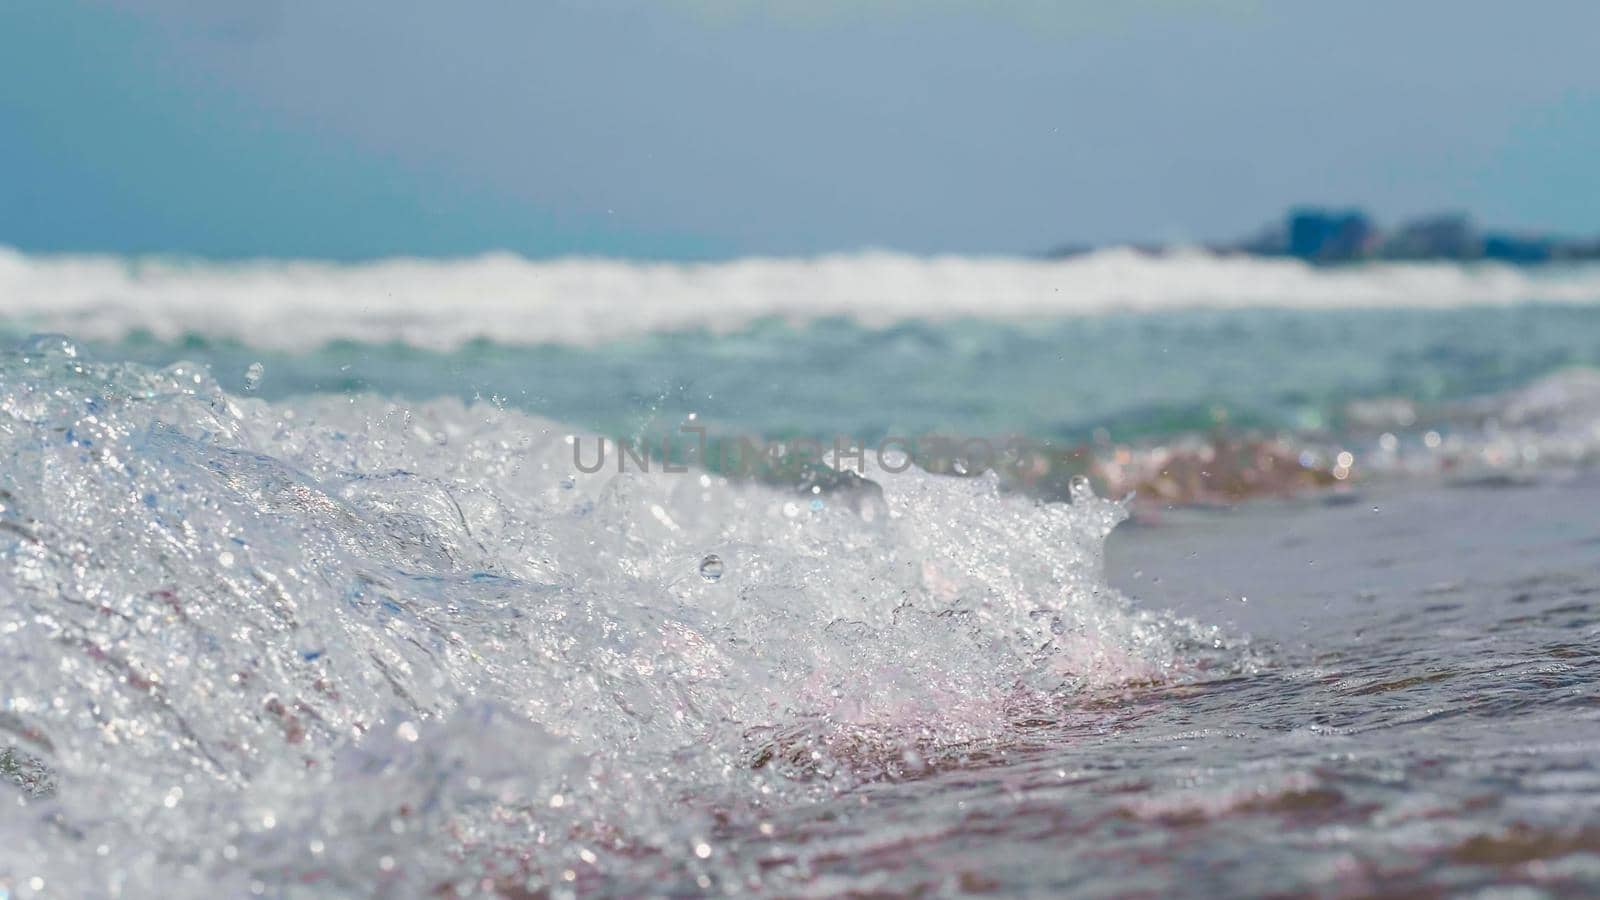 Close up sea, ocean waves. View from Seashore, blue sky, summer landscape at the sea. Blue, clear water